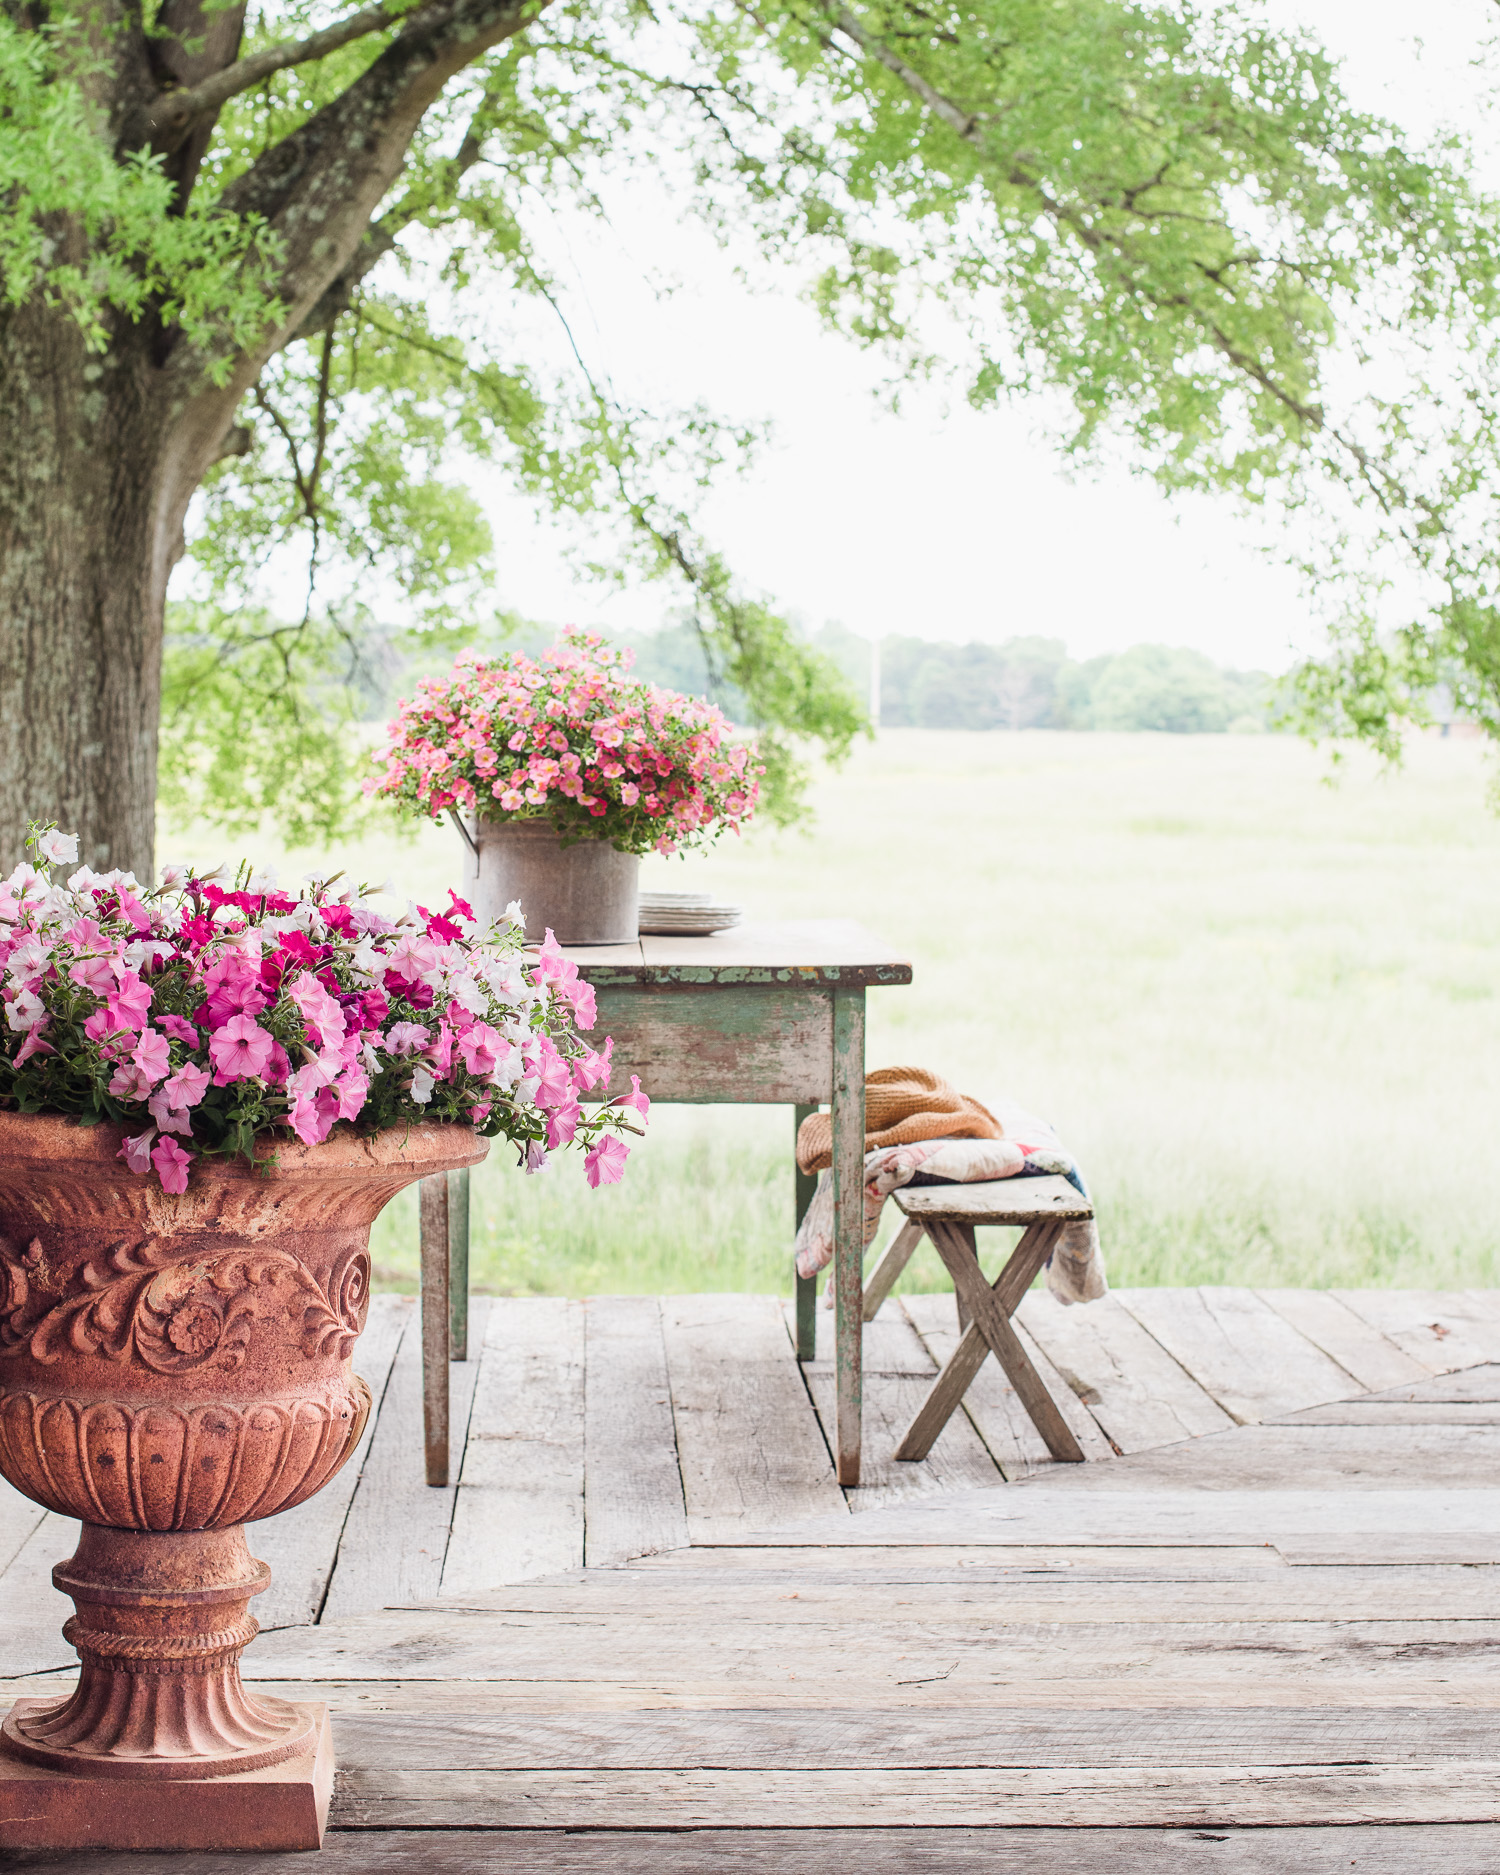 Flowers in Urns, buckets, antique table, tattered quilt